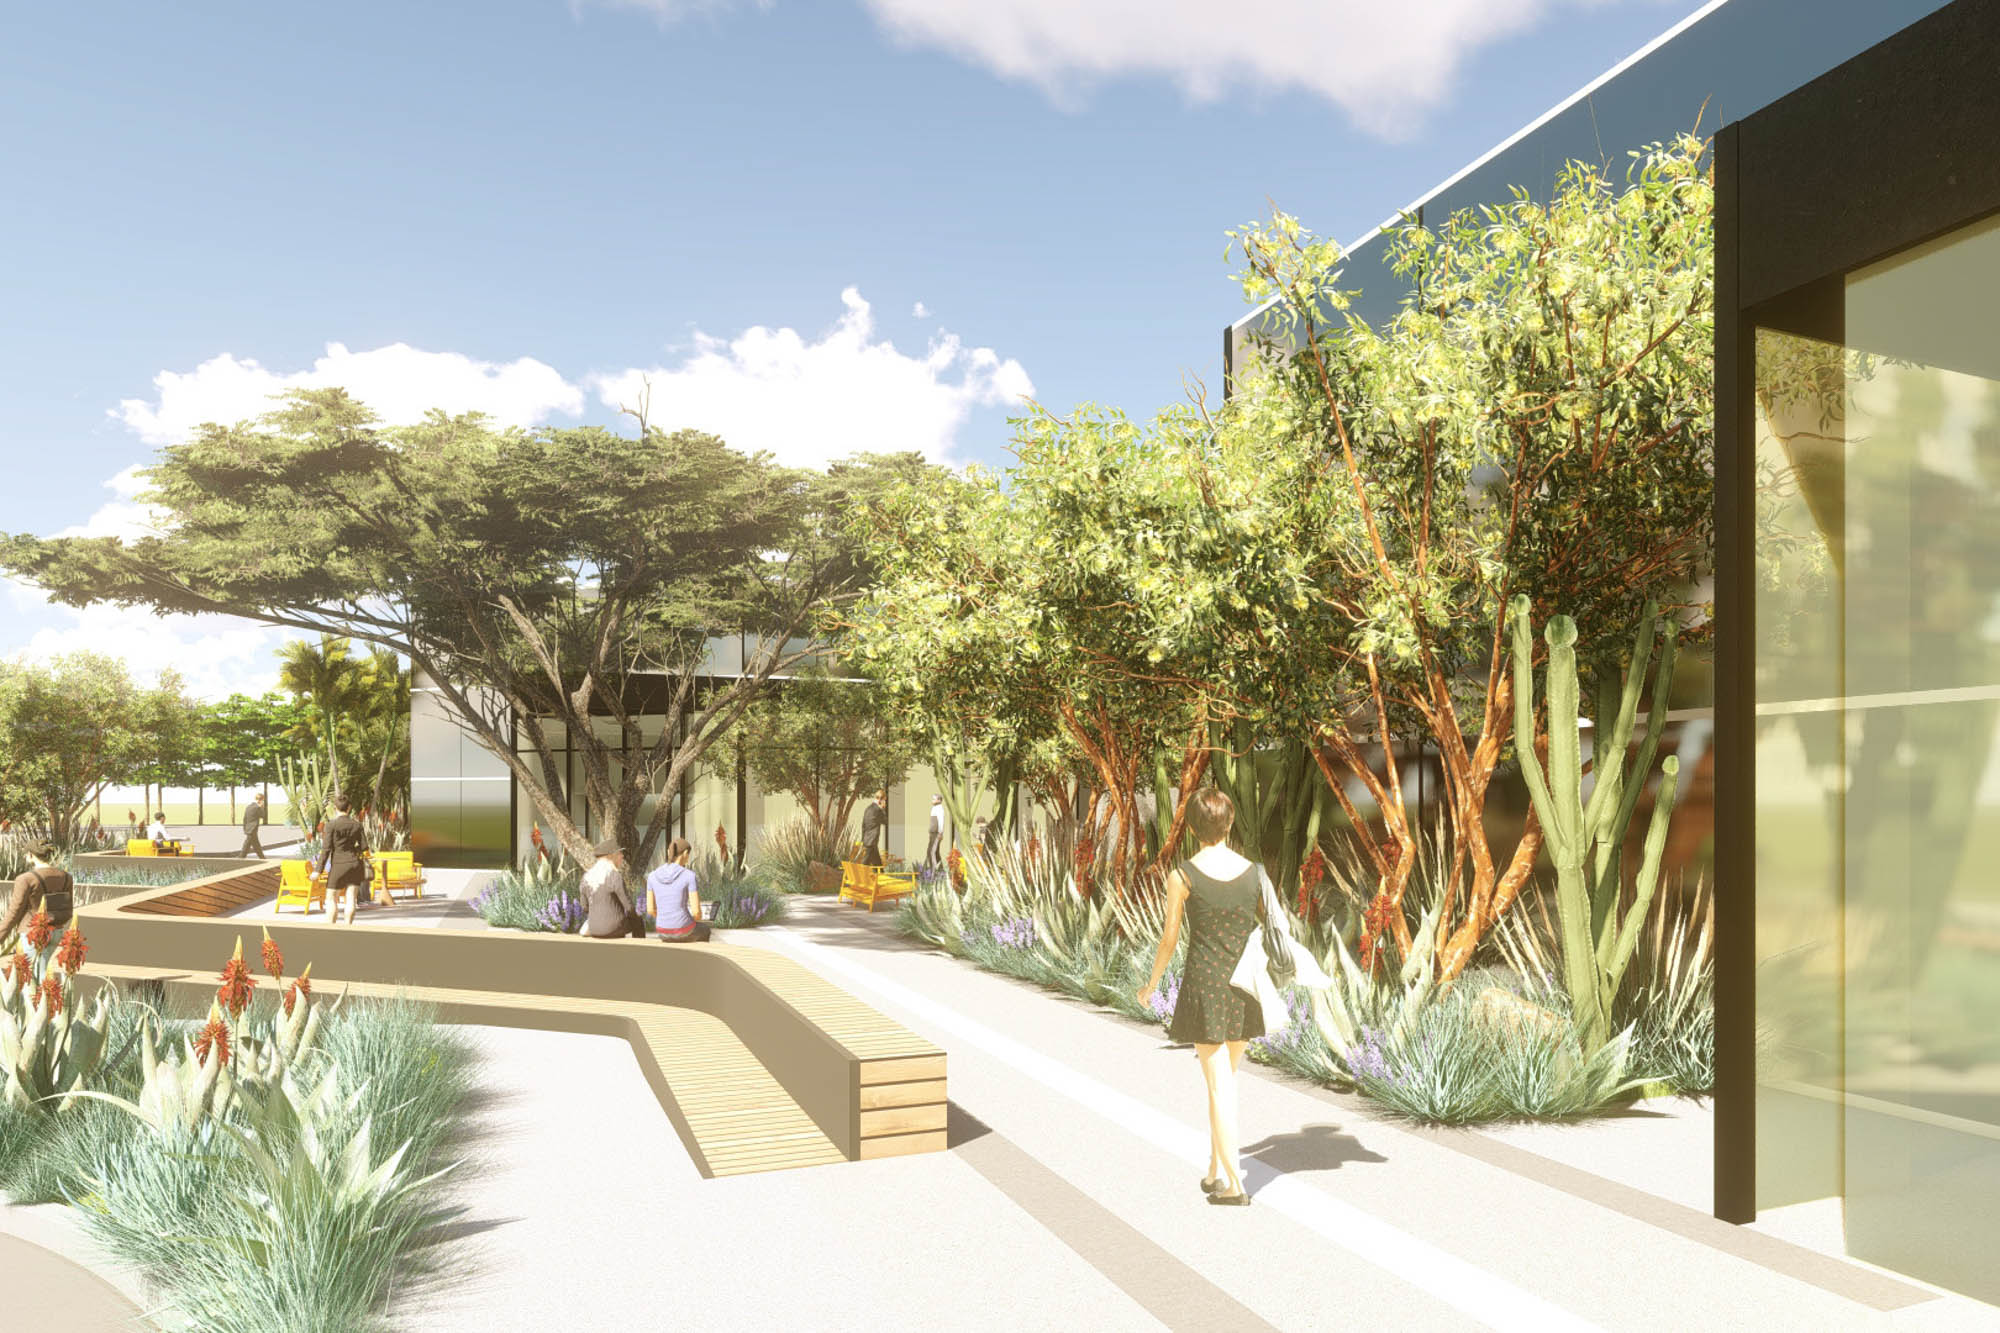 exterior rendering of the planters, trees, and seating